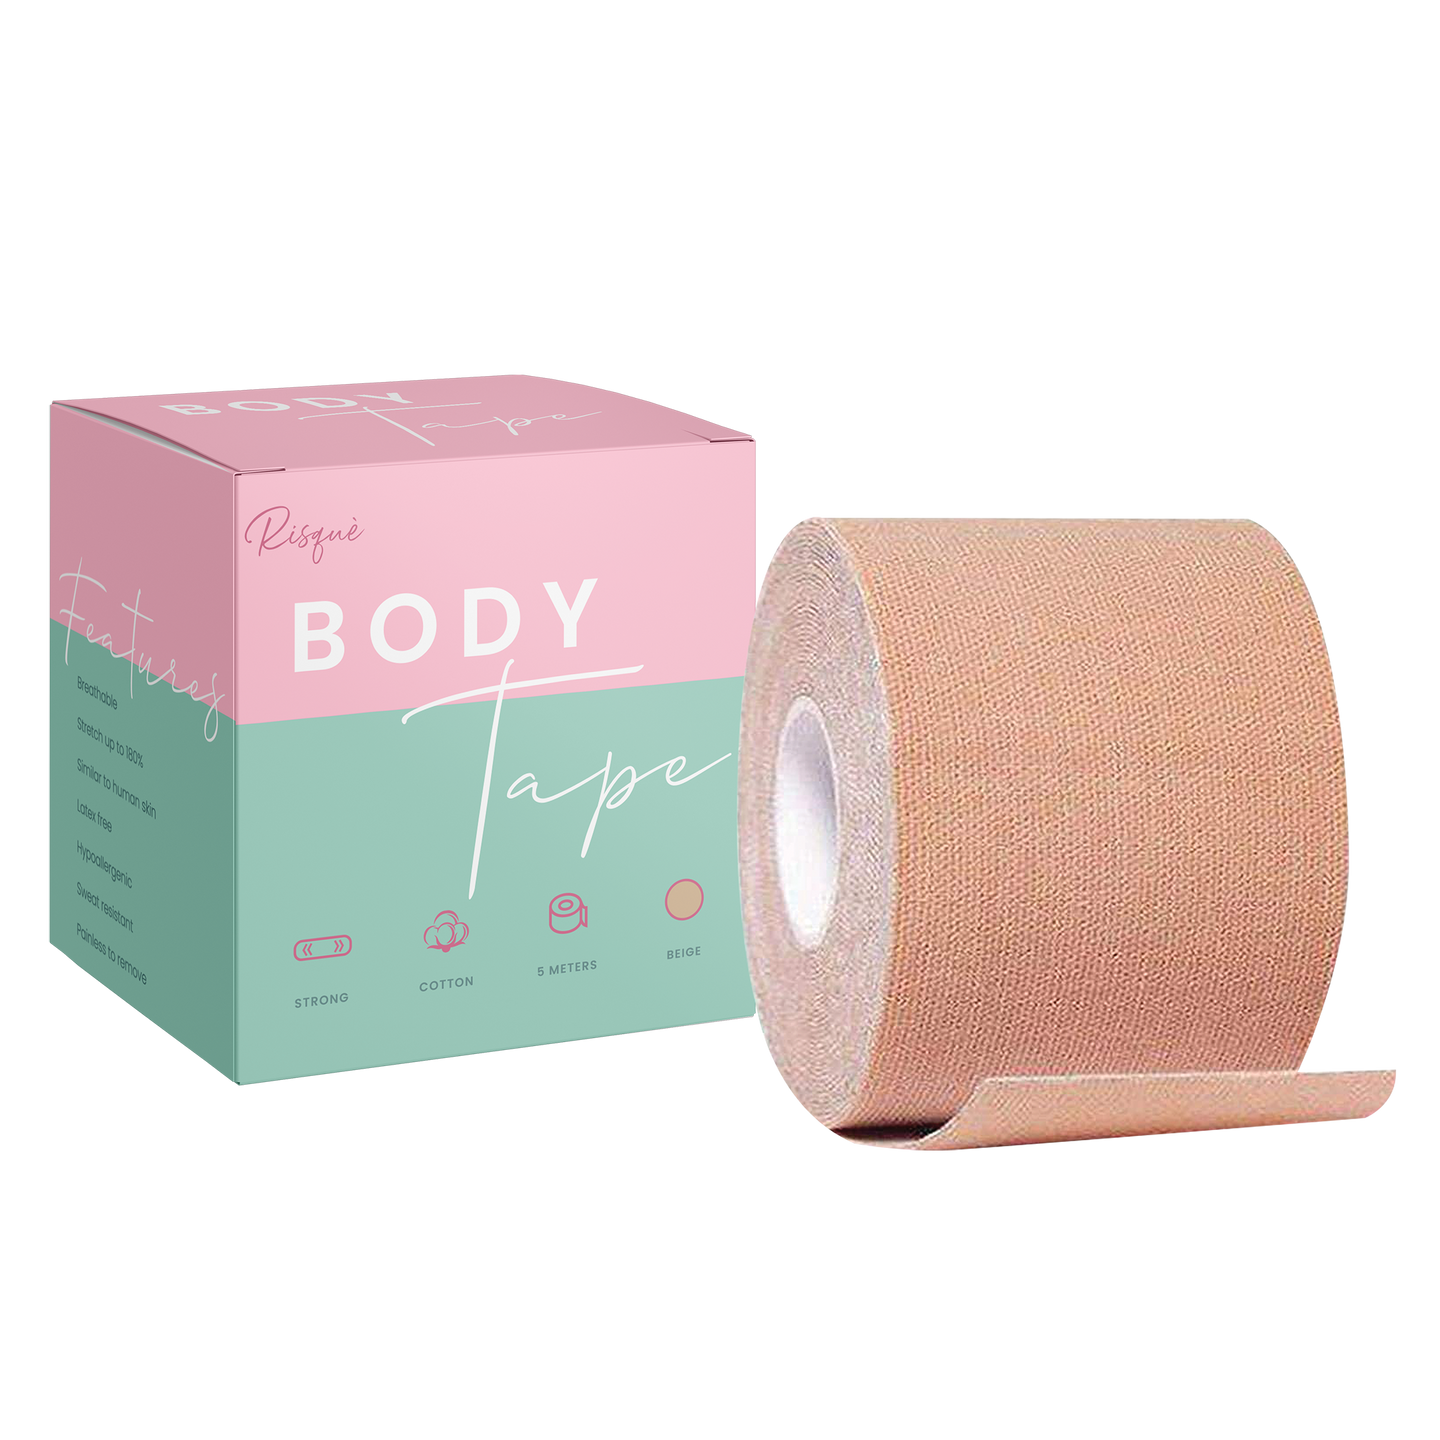 Buy Cloudzy Boob Tape with Body Clothing Fashion Tape & Lift Up